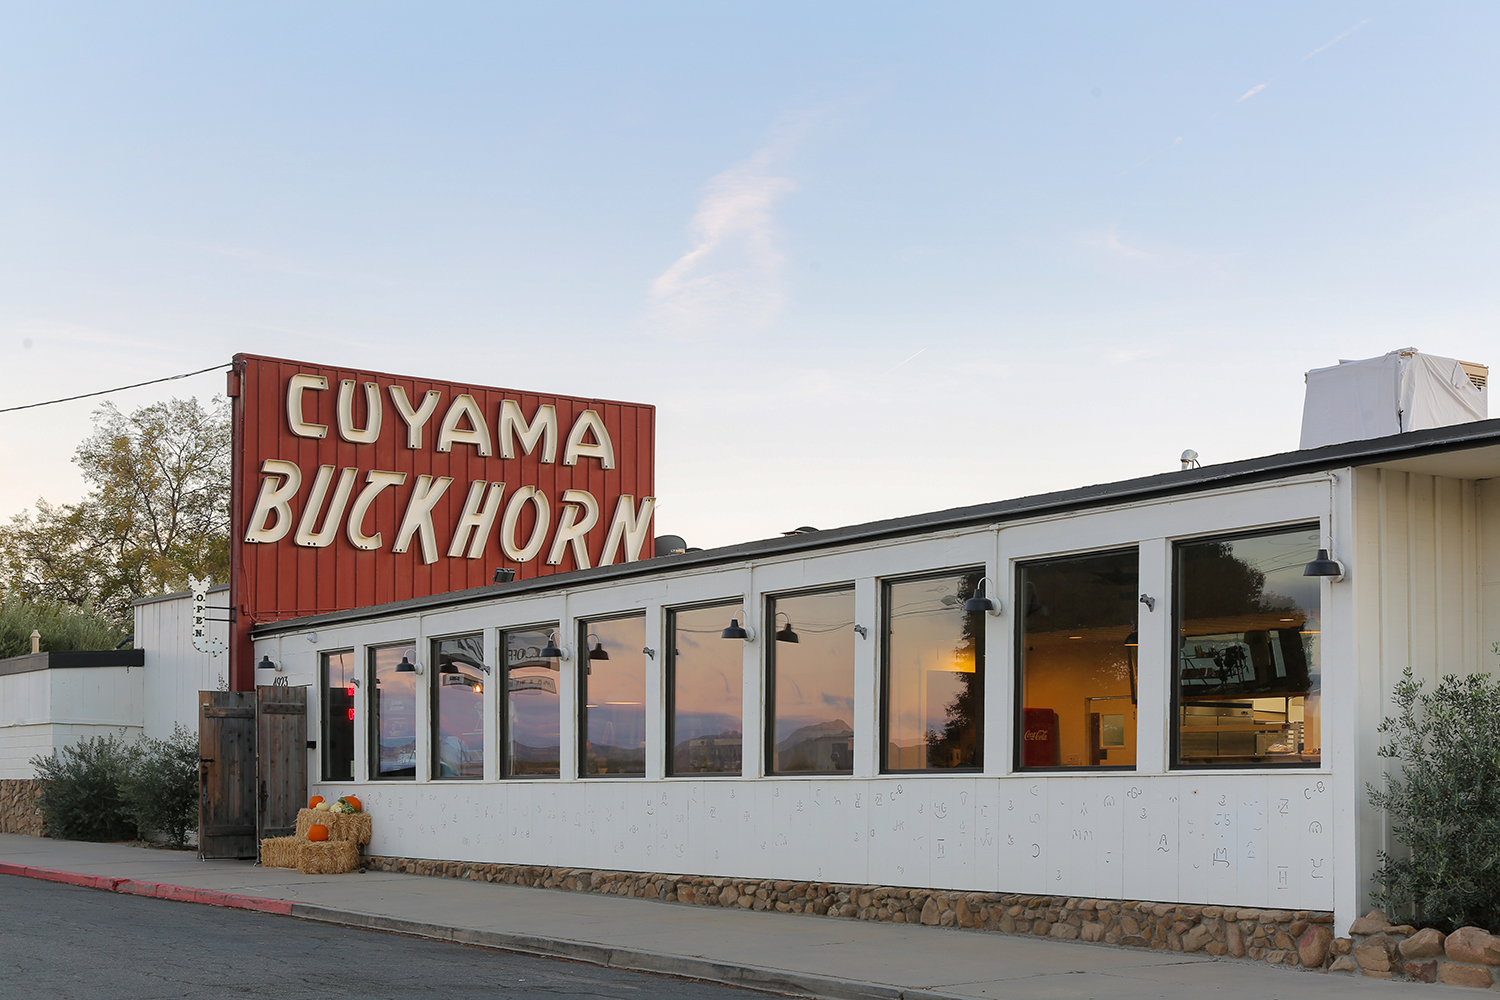 Street view of Cuyama Buckhorn including their large sign in New Cuyama, California.